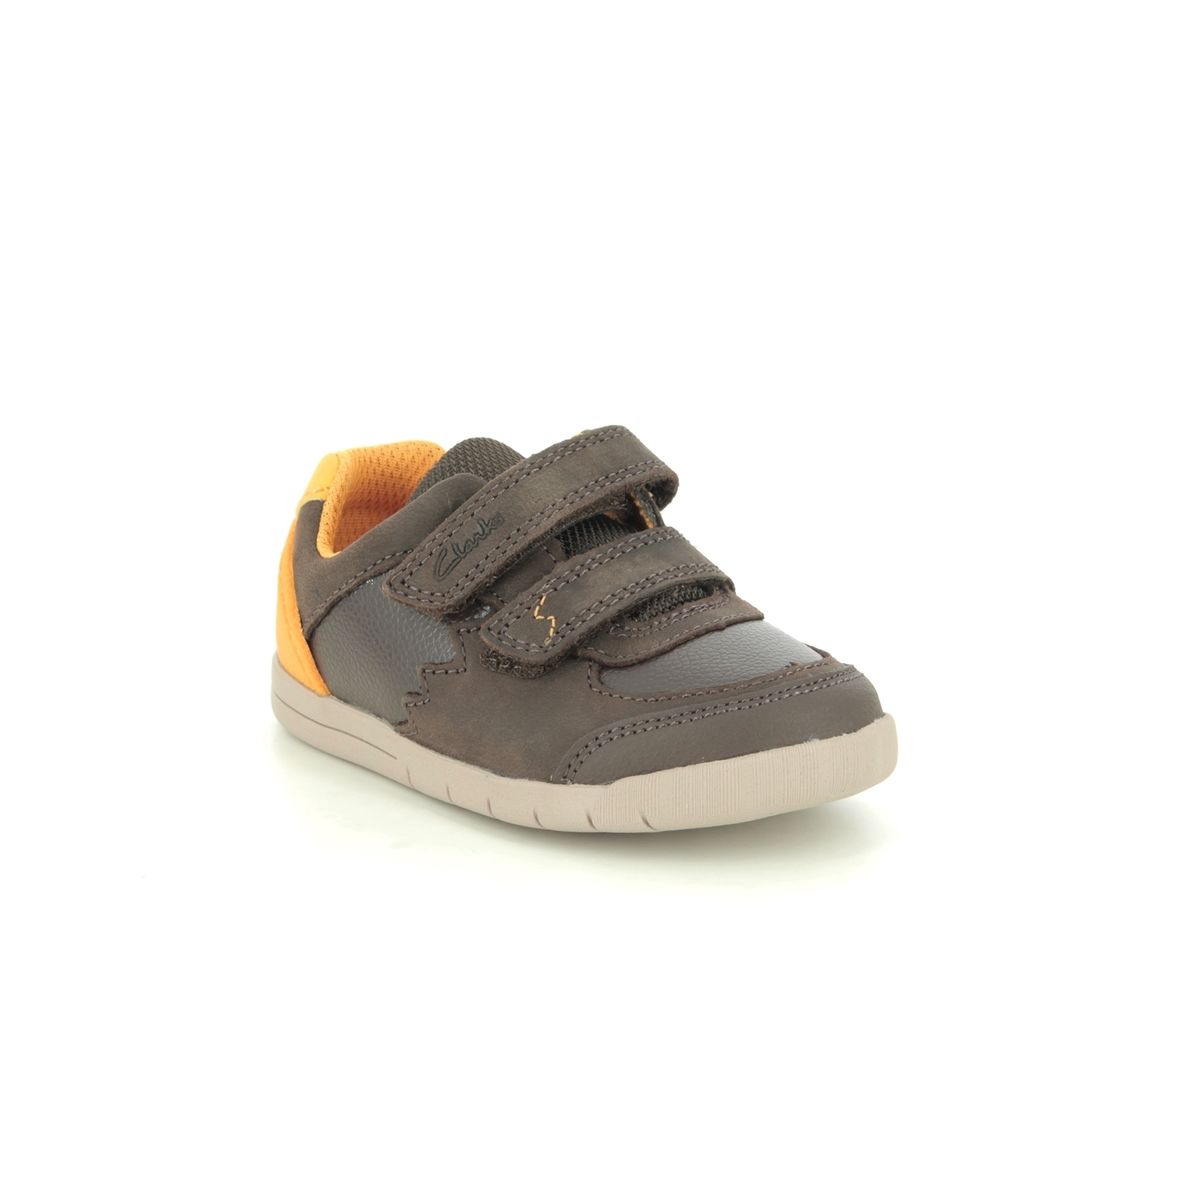 Clarks Rex Quest T Brown Leather Kids Boys Toddler Shoes 567756F In Size 8 In Plain Brown Leather F Width Fitting Regular Fit For kids